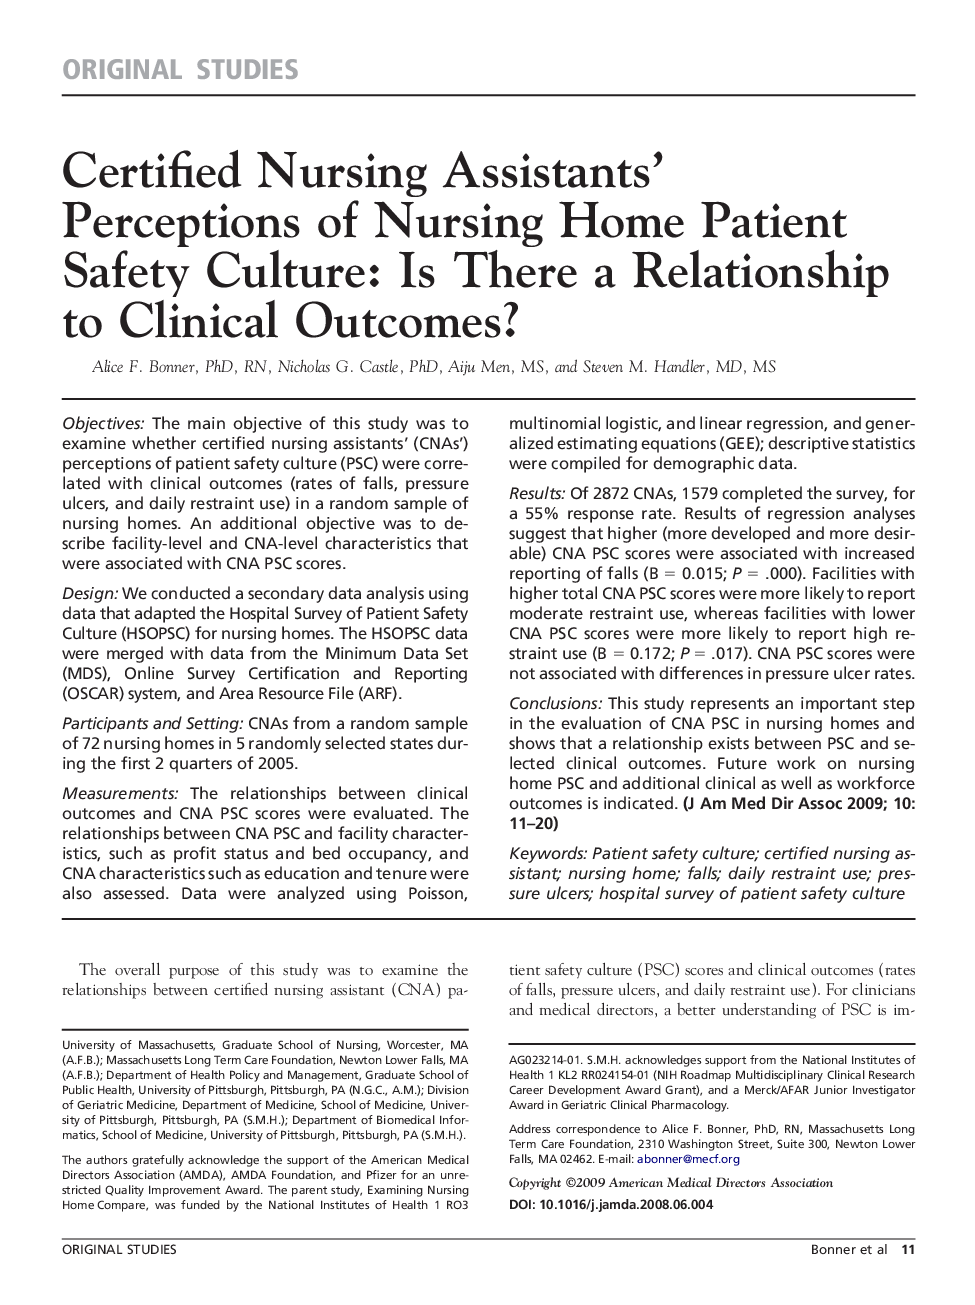 Certified Nursing Assistants' Perceptions of Nursing Home Patient Safety Culture: Is There a Relationship to Clinical Outcomes?